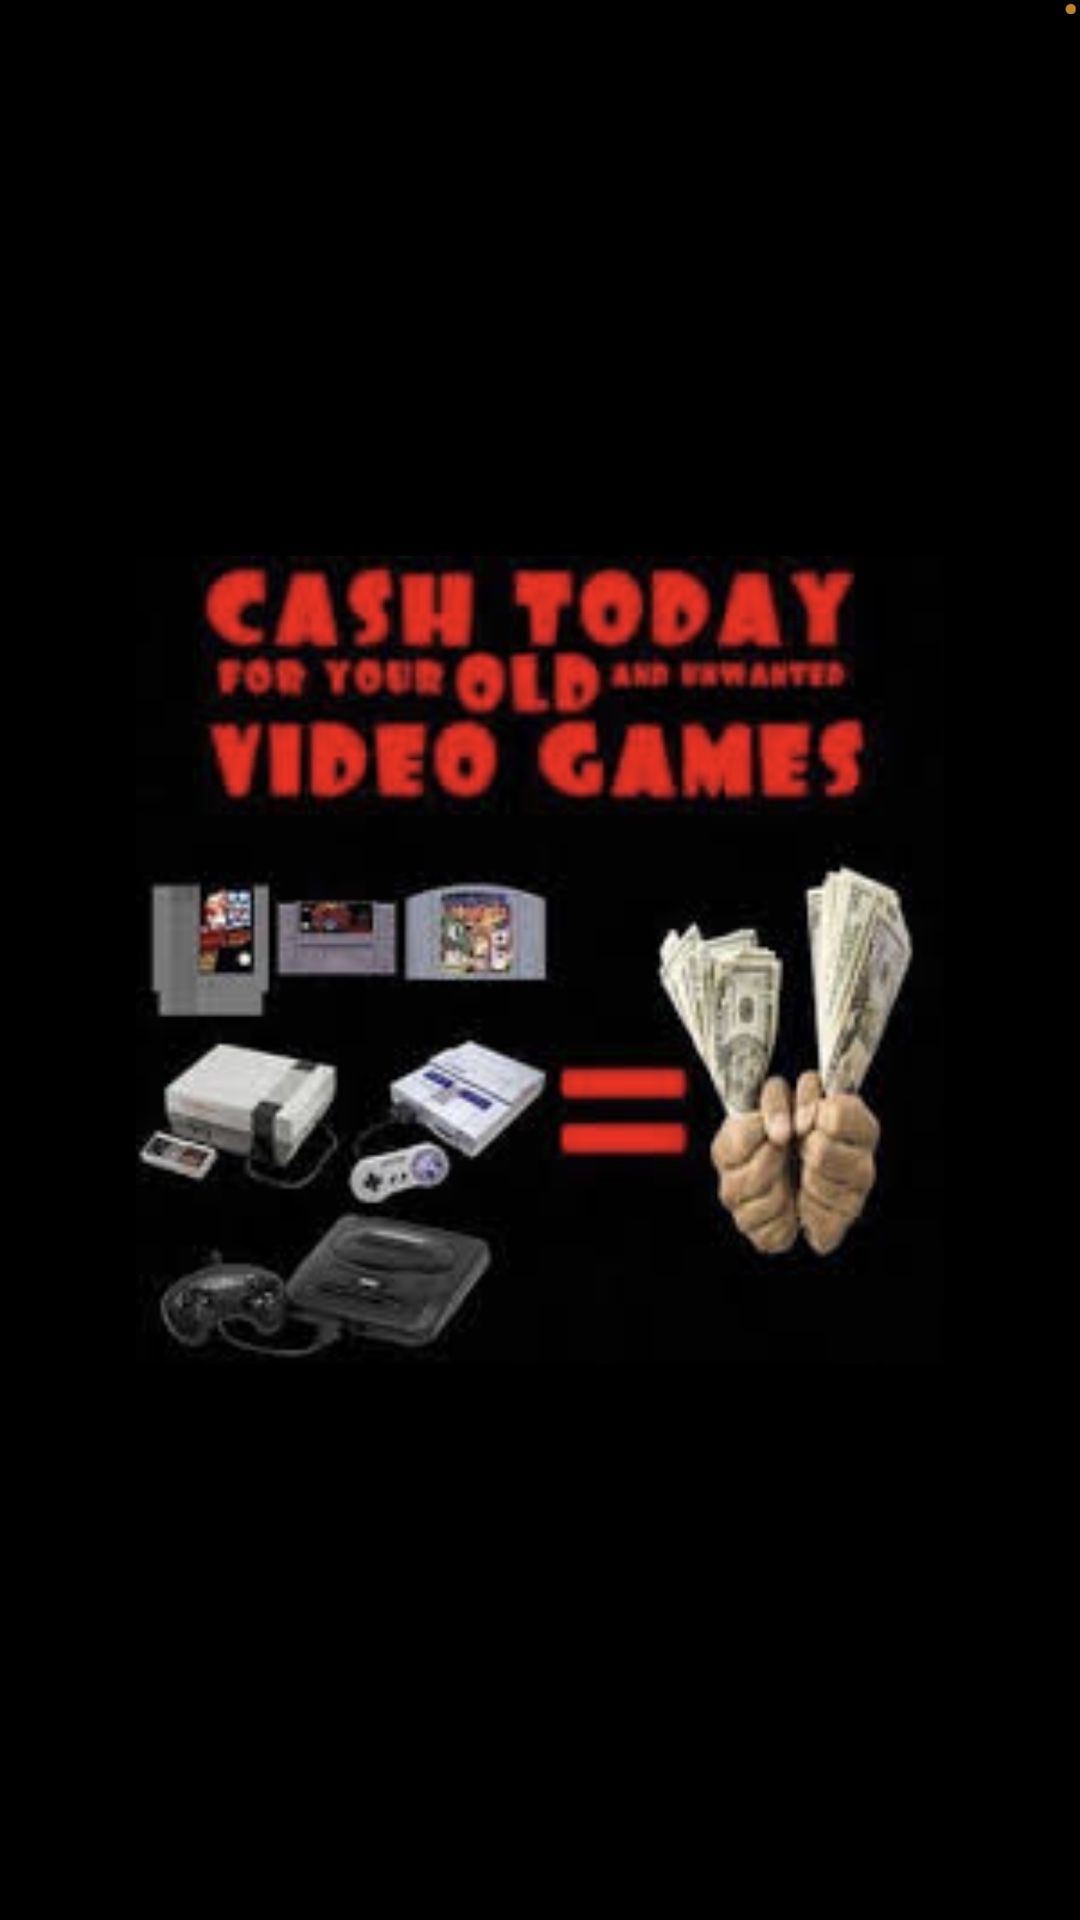 Looking To Purchase Old Video Games